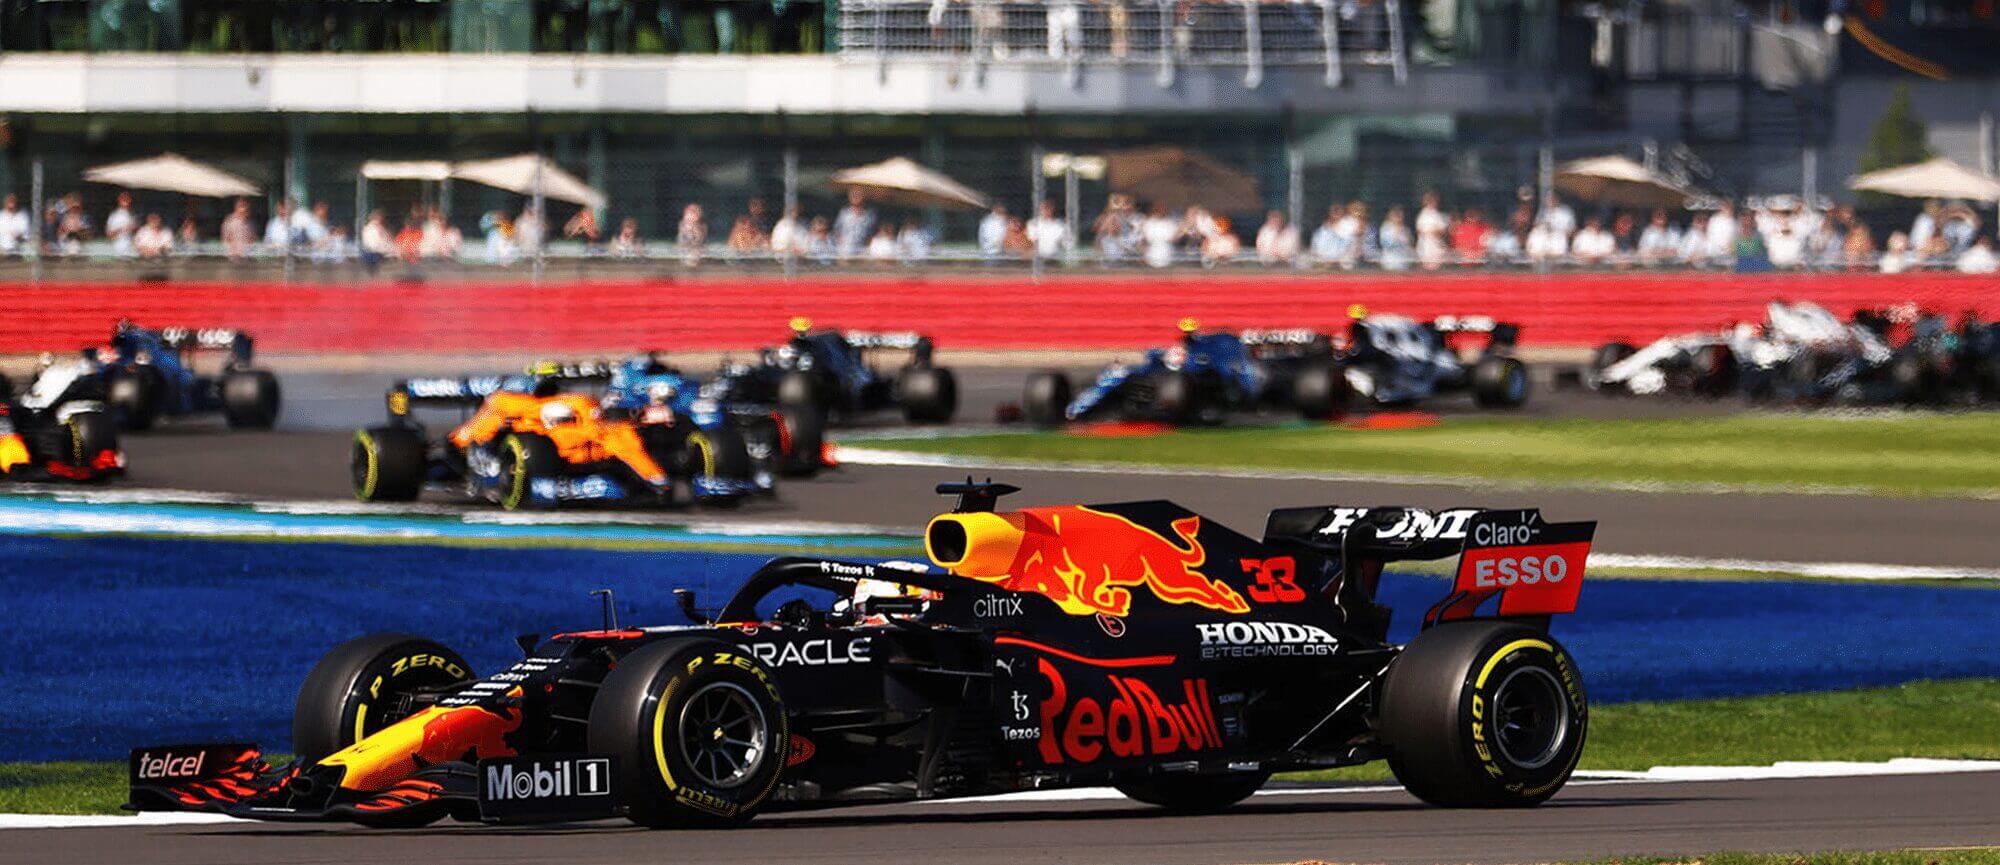 Red Bull car on the racetrack